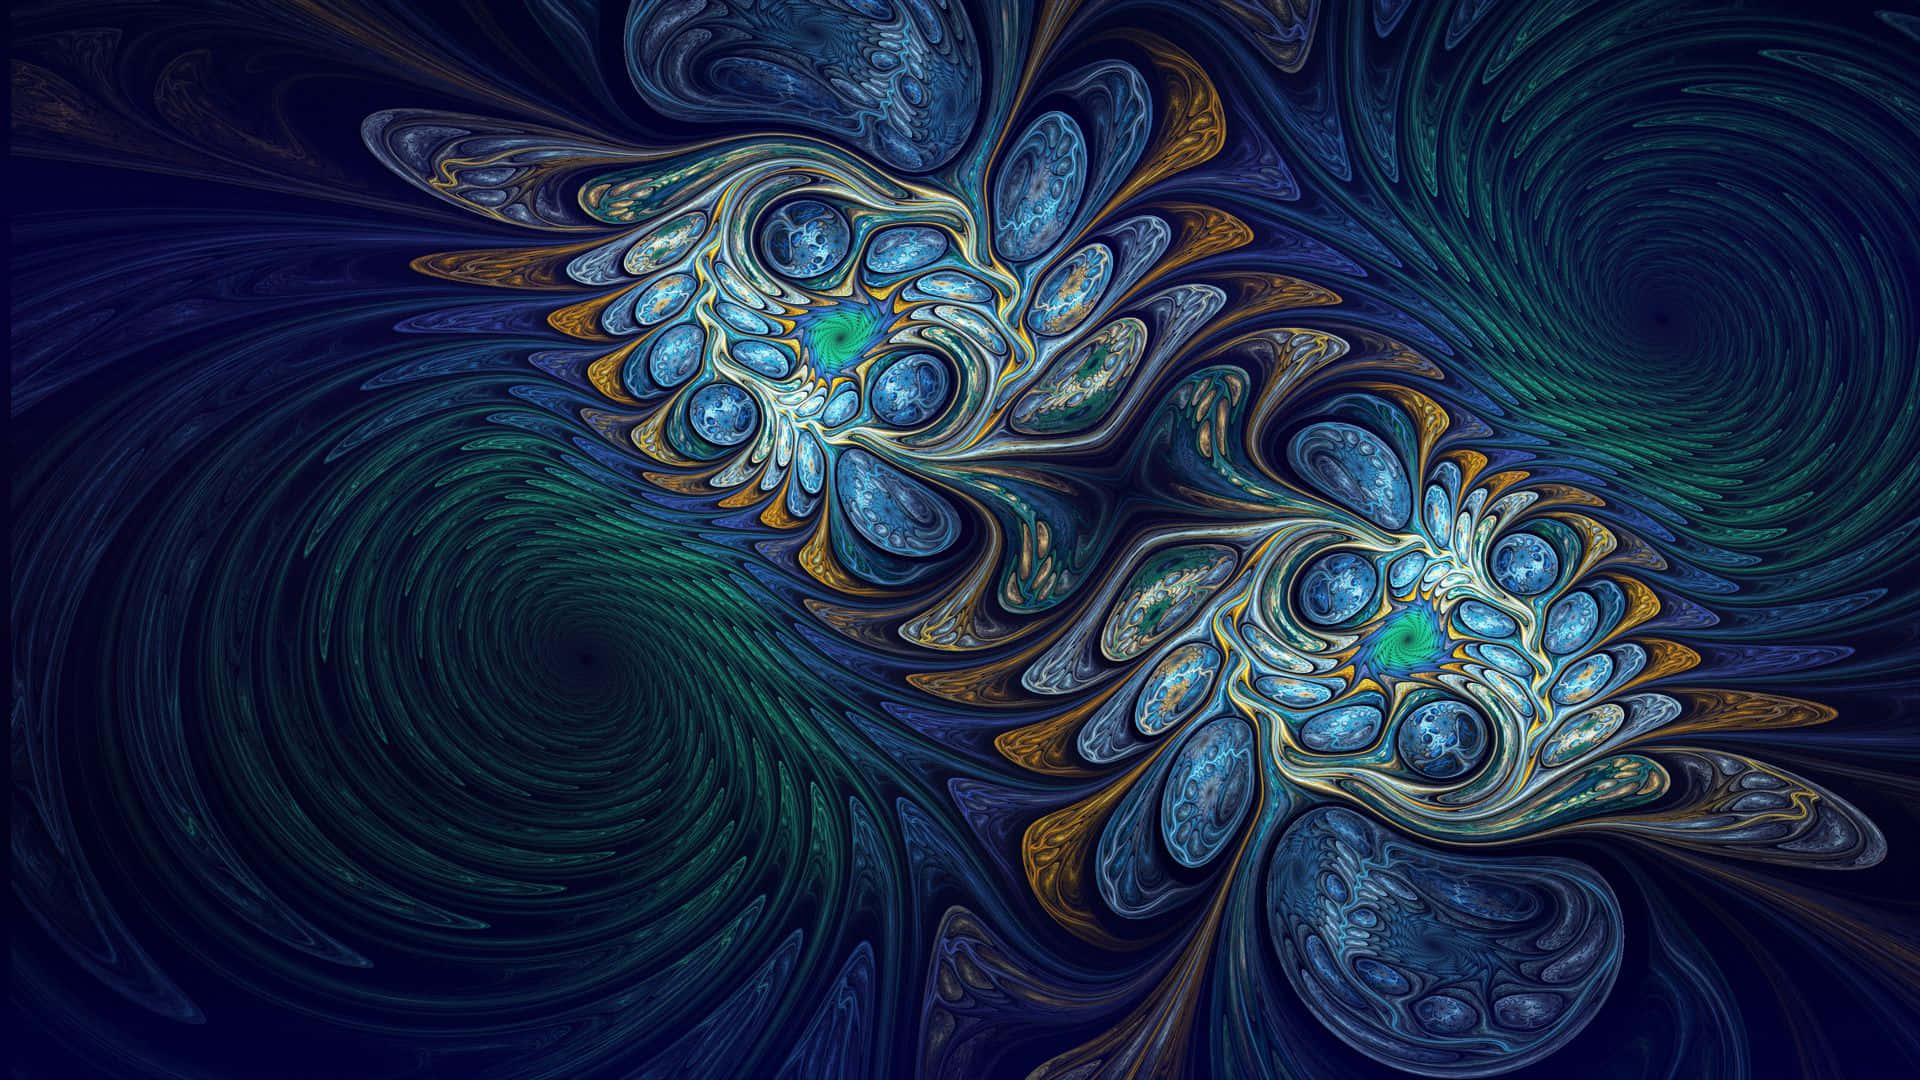 "An Endless Exploration of a World of Colorful Fractals" Wallpaper